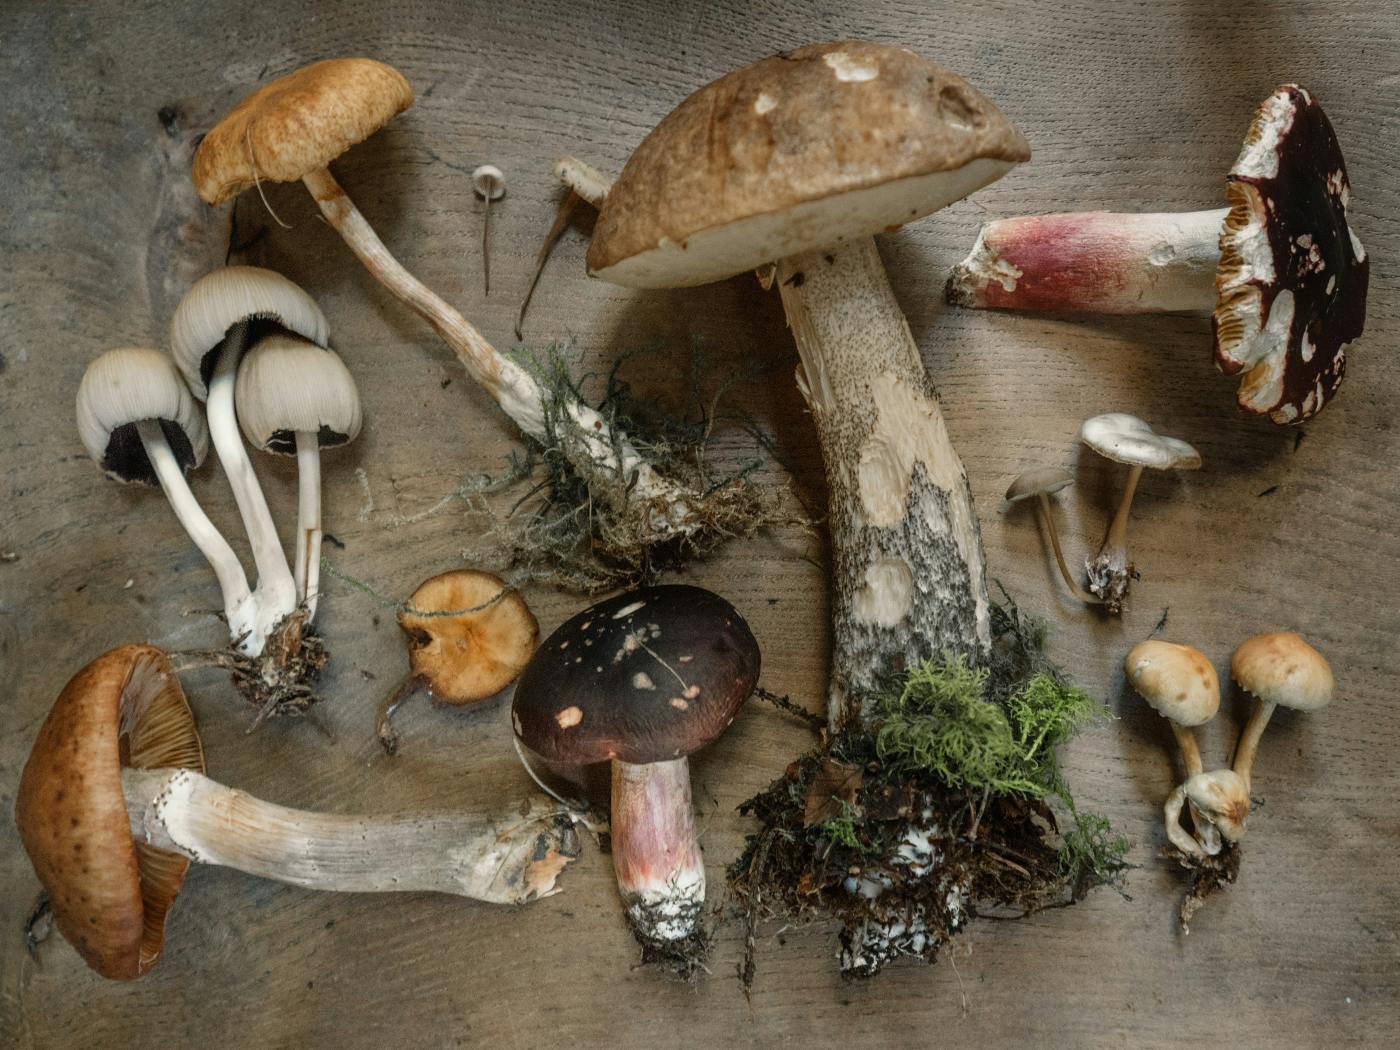 A variety of mushrooms with roots on a table